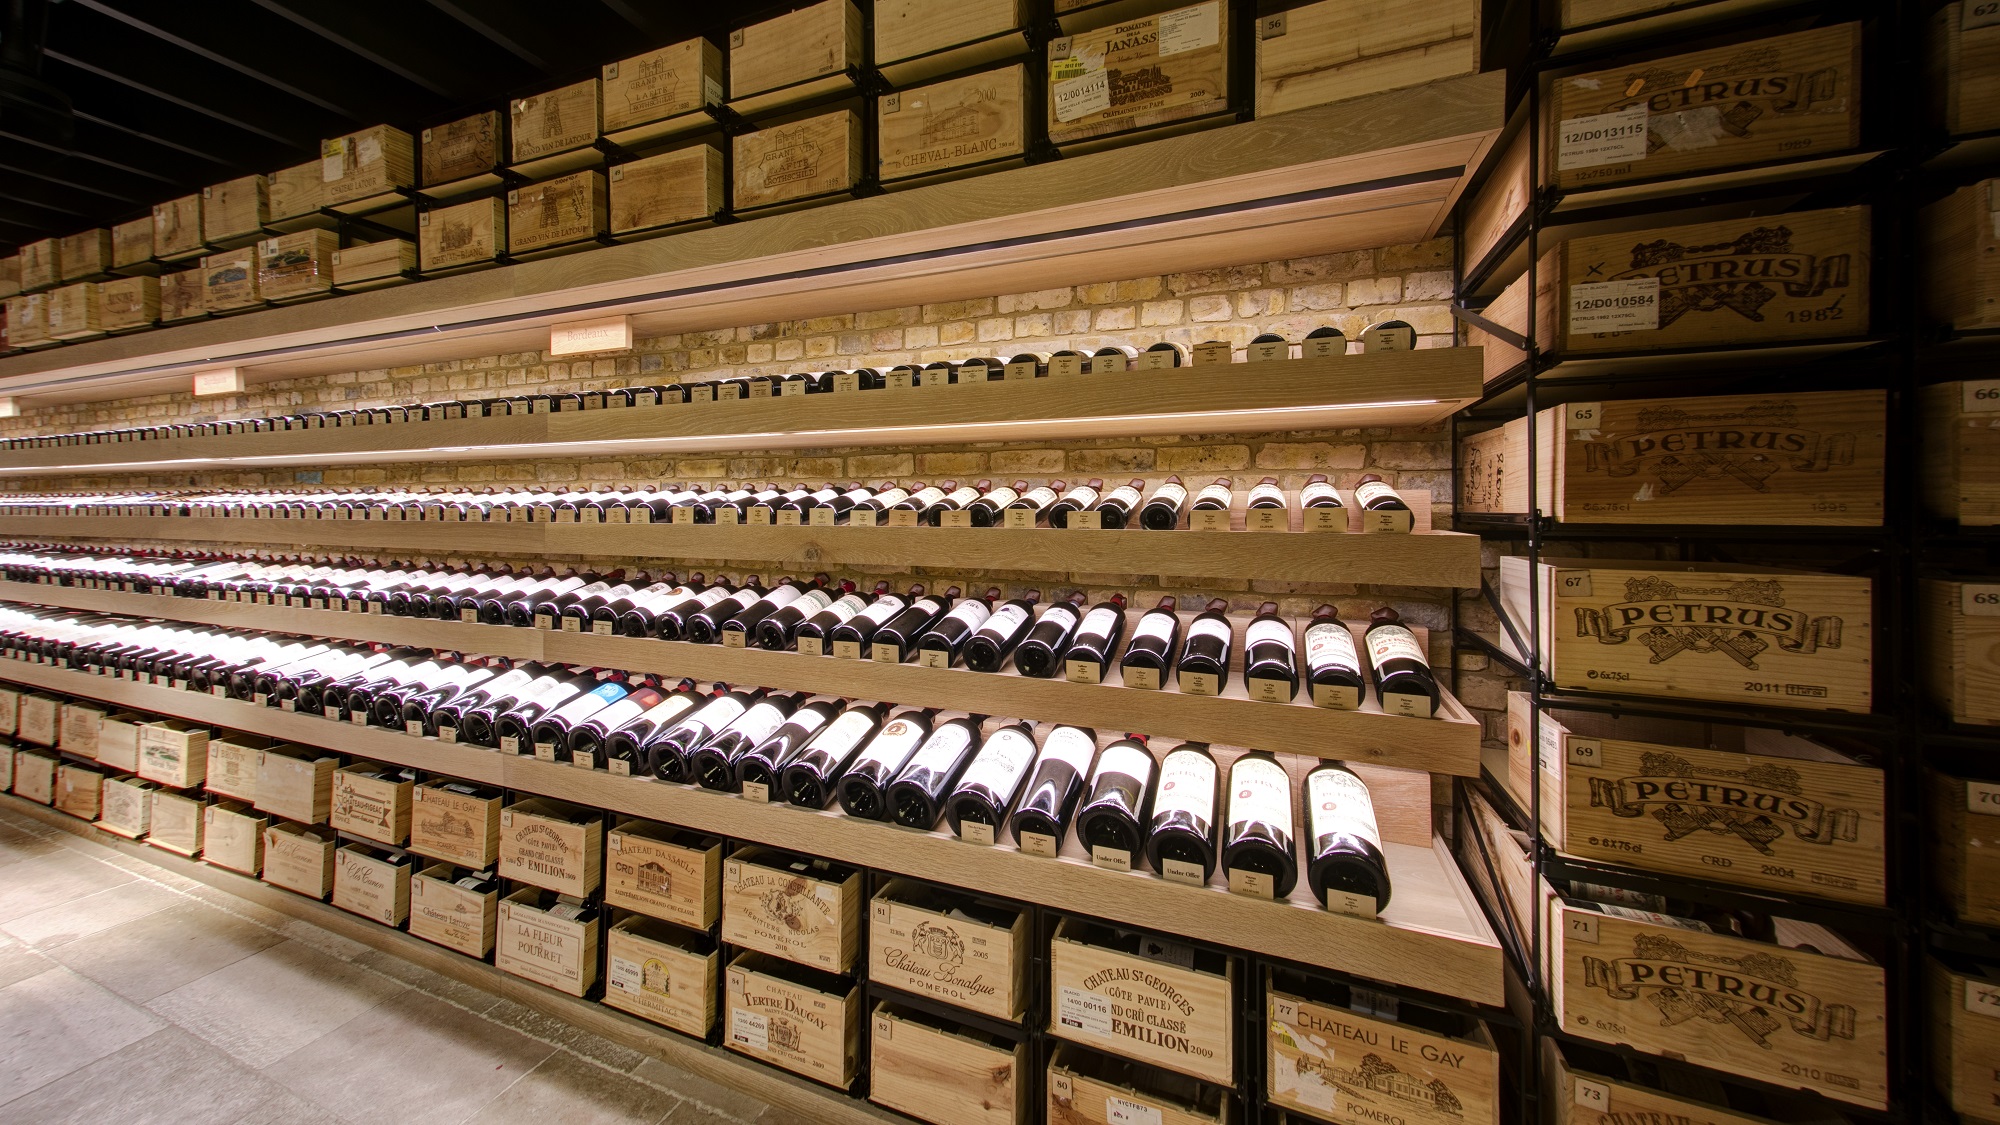 The Bordeaux selection at Hedonism Wines in Mayfair